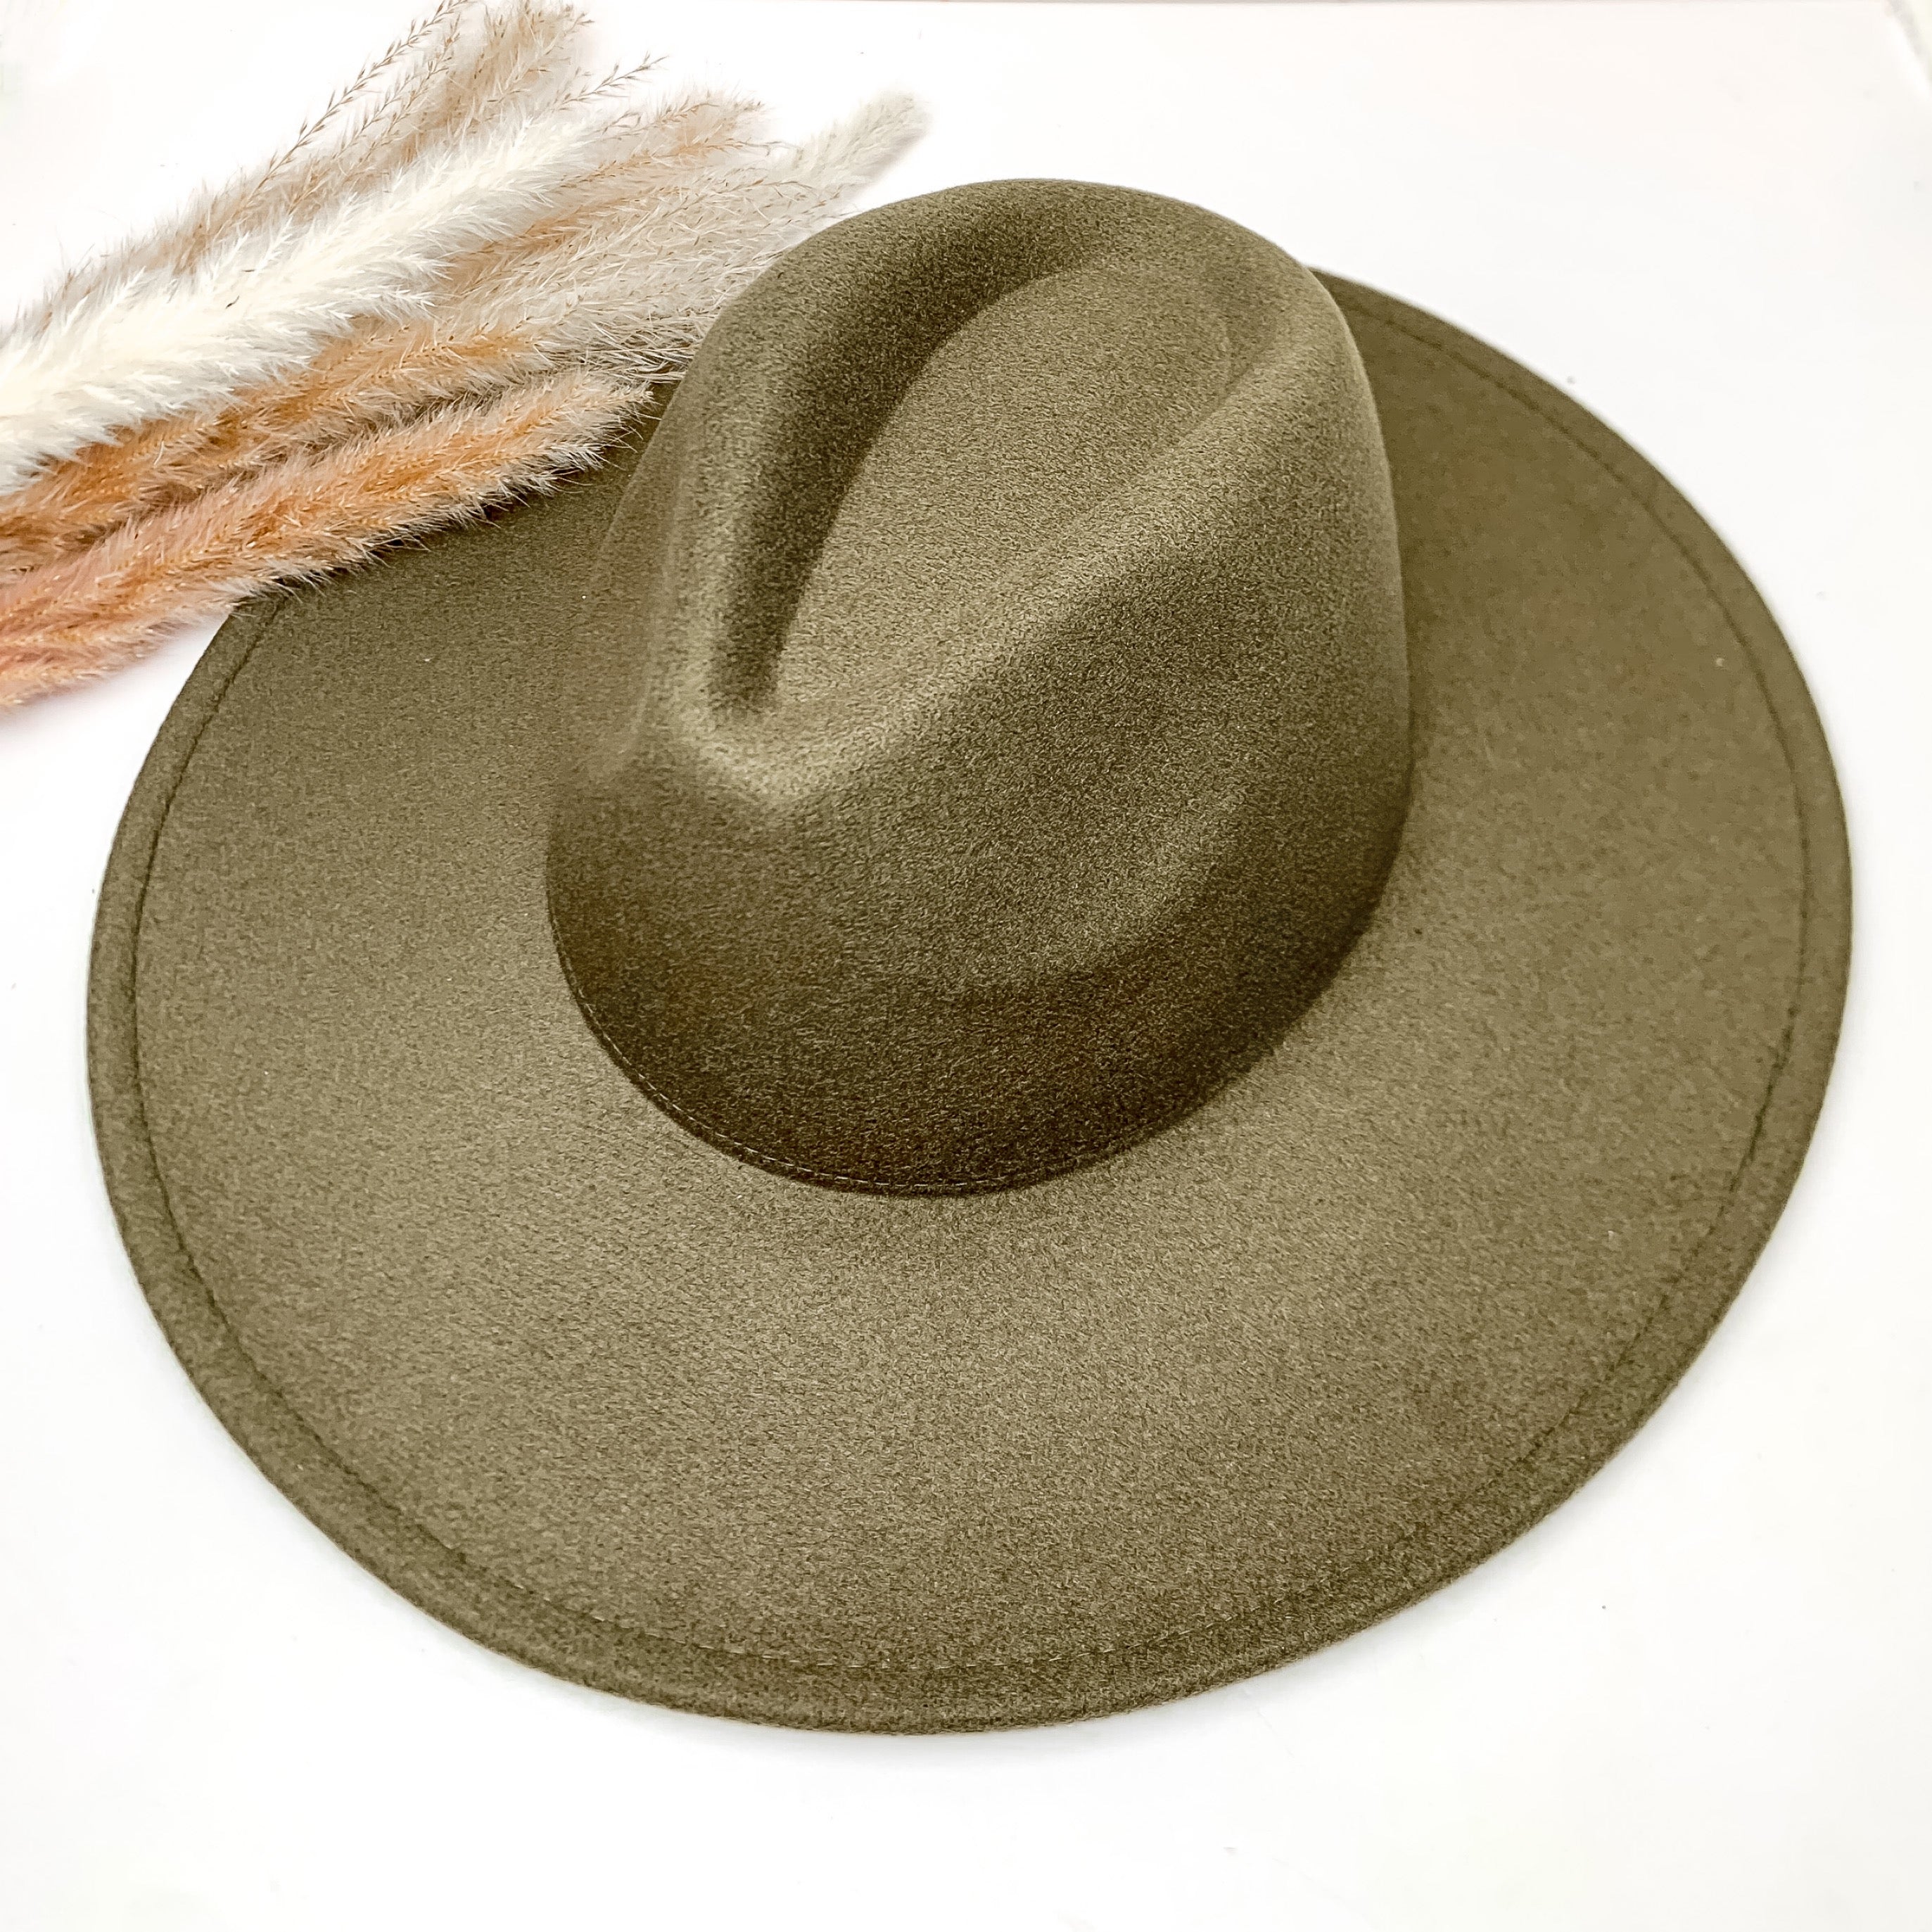 Plain and simple faux felt hat in olive green color. This hat is sitting on a white background. There is brown and white feathers to the left of the hat.